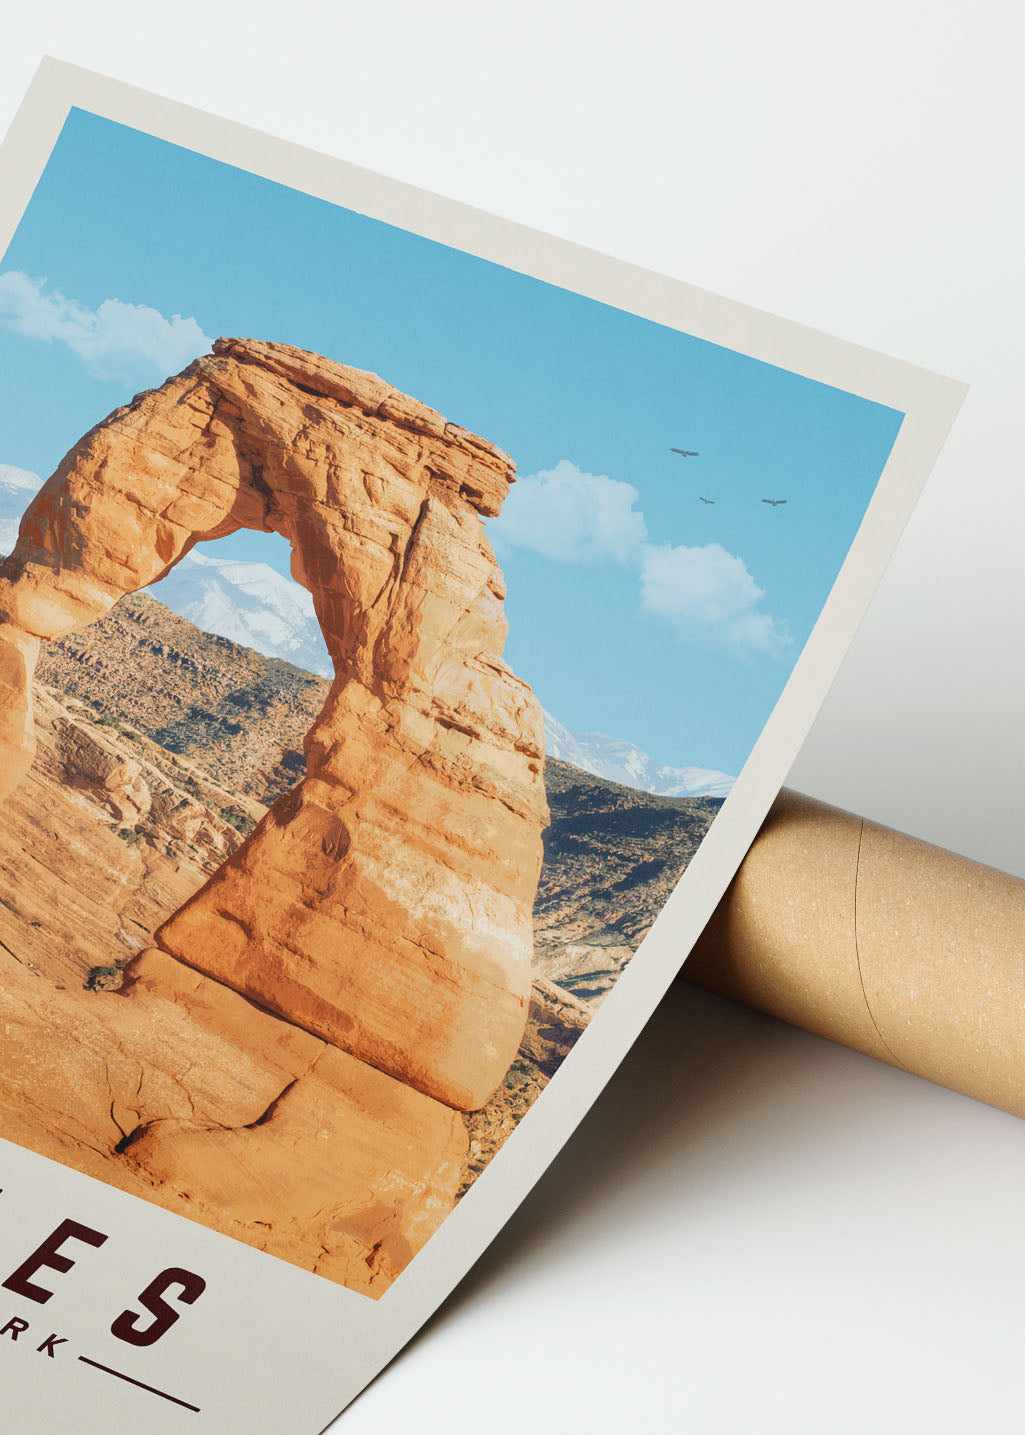 Arches Minimalist National Park Poster